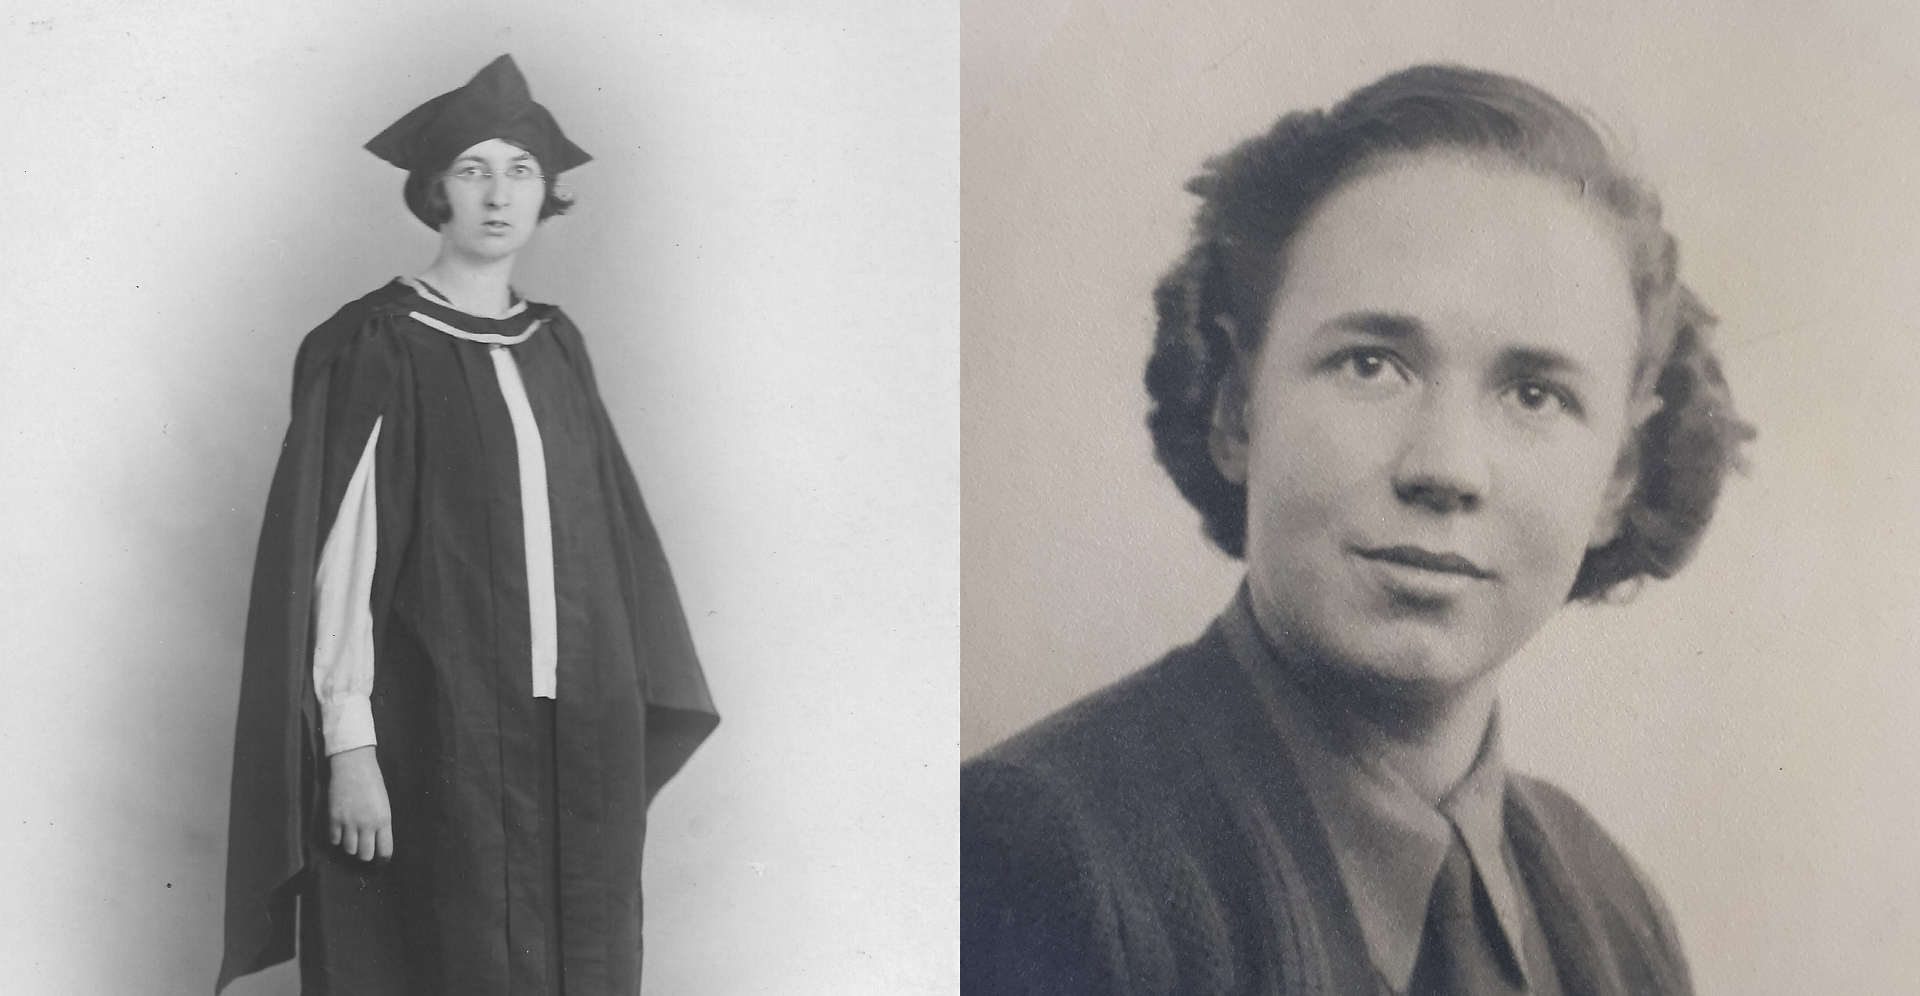 Photos of Mona Hirst and Mary Lee Berners-Lee in earlier life